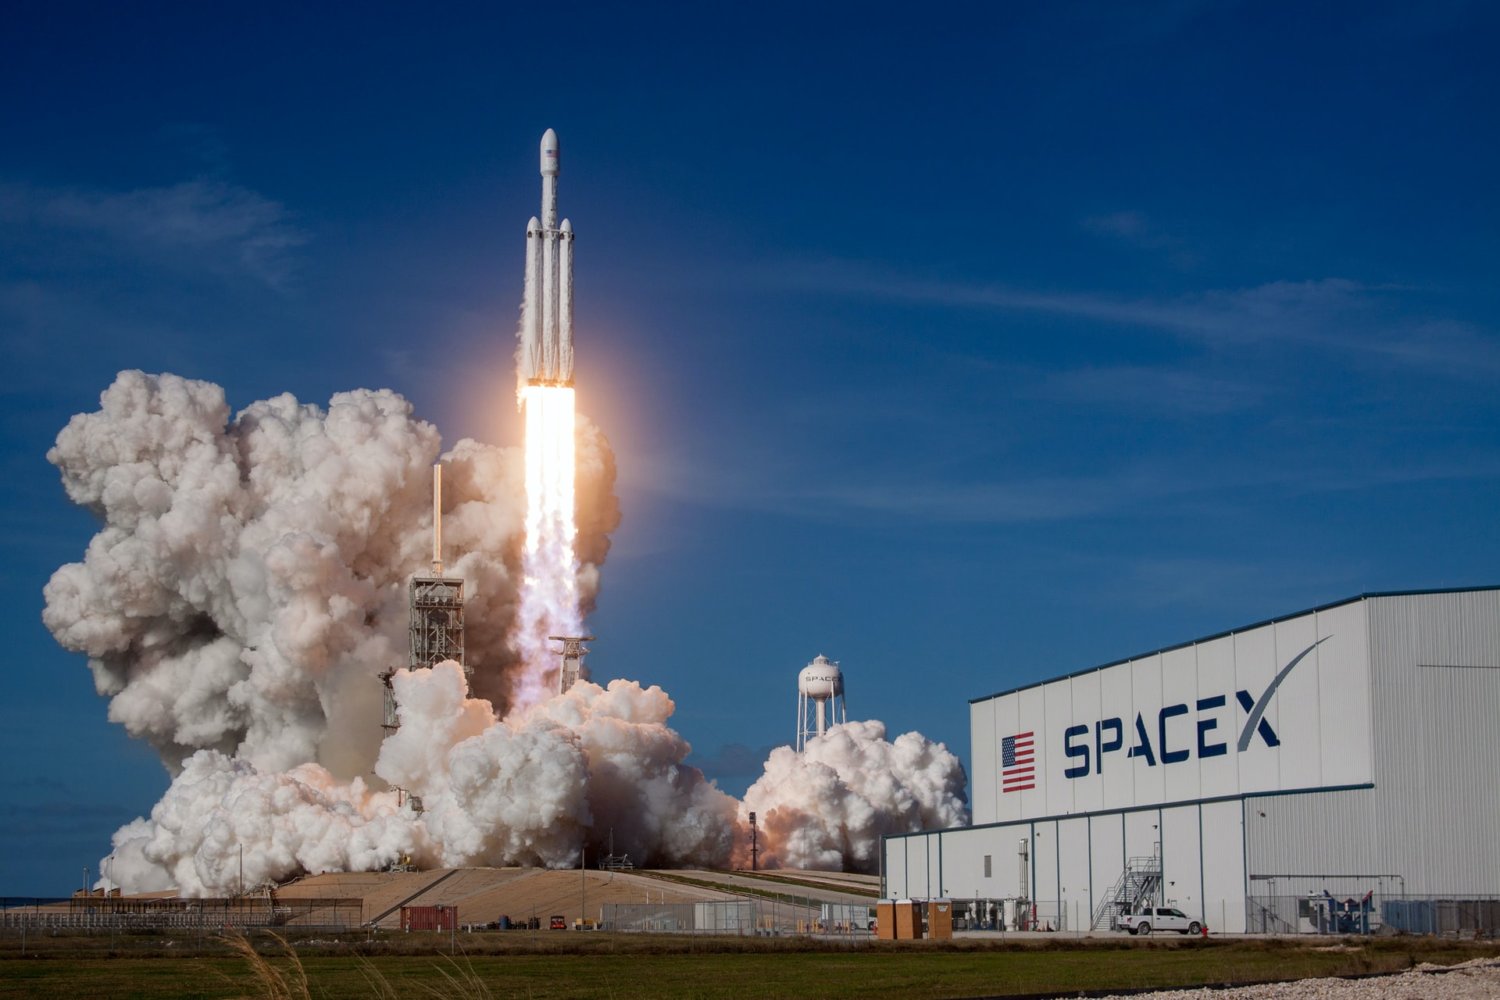 spacex hangar with rocket taking off